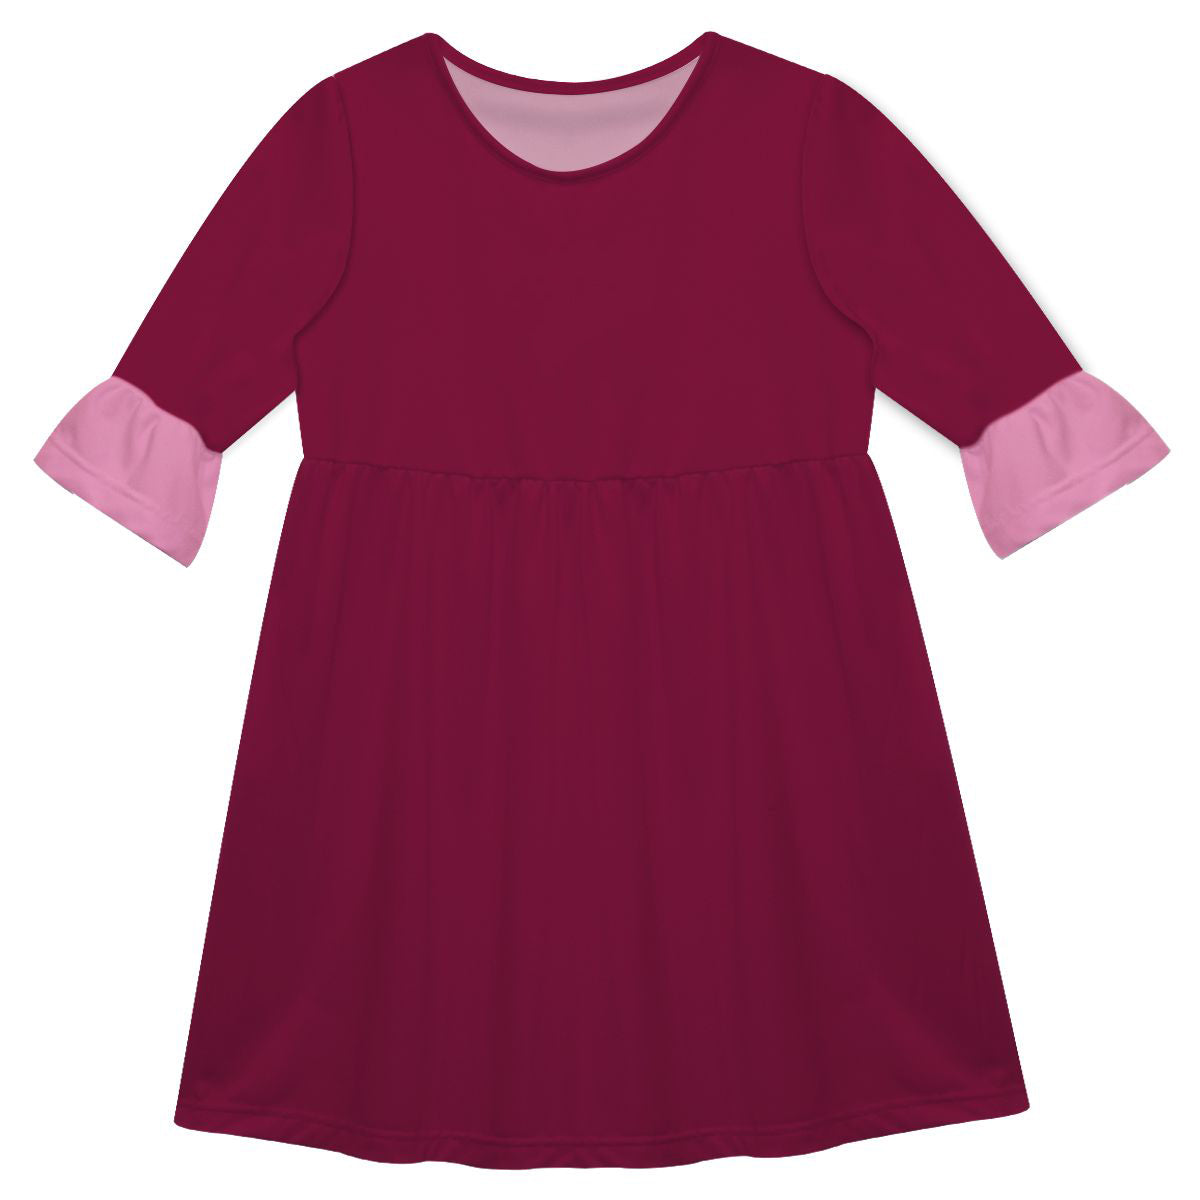 Girls maroon and pink dress with monogram - Wimziy&Co.